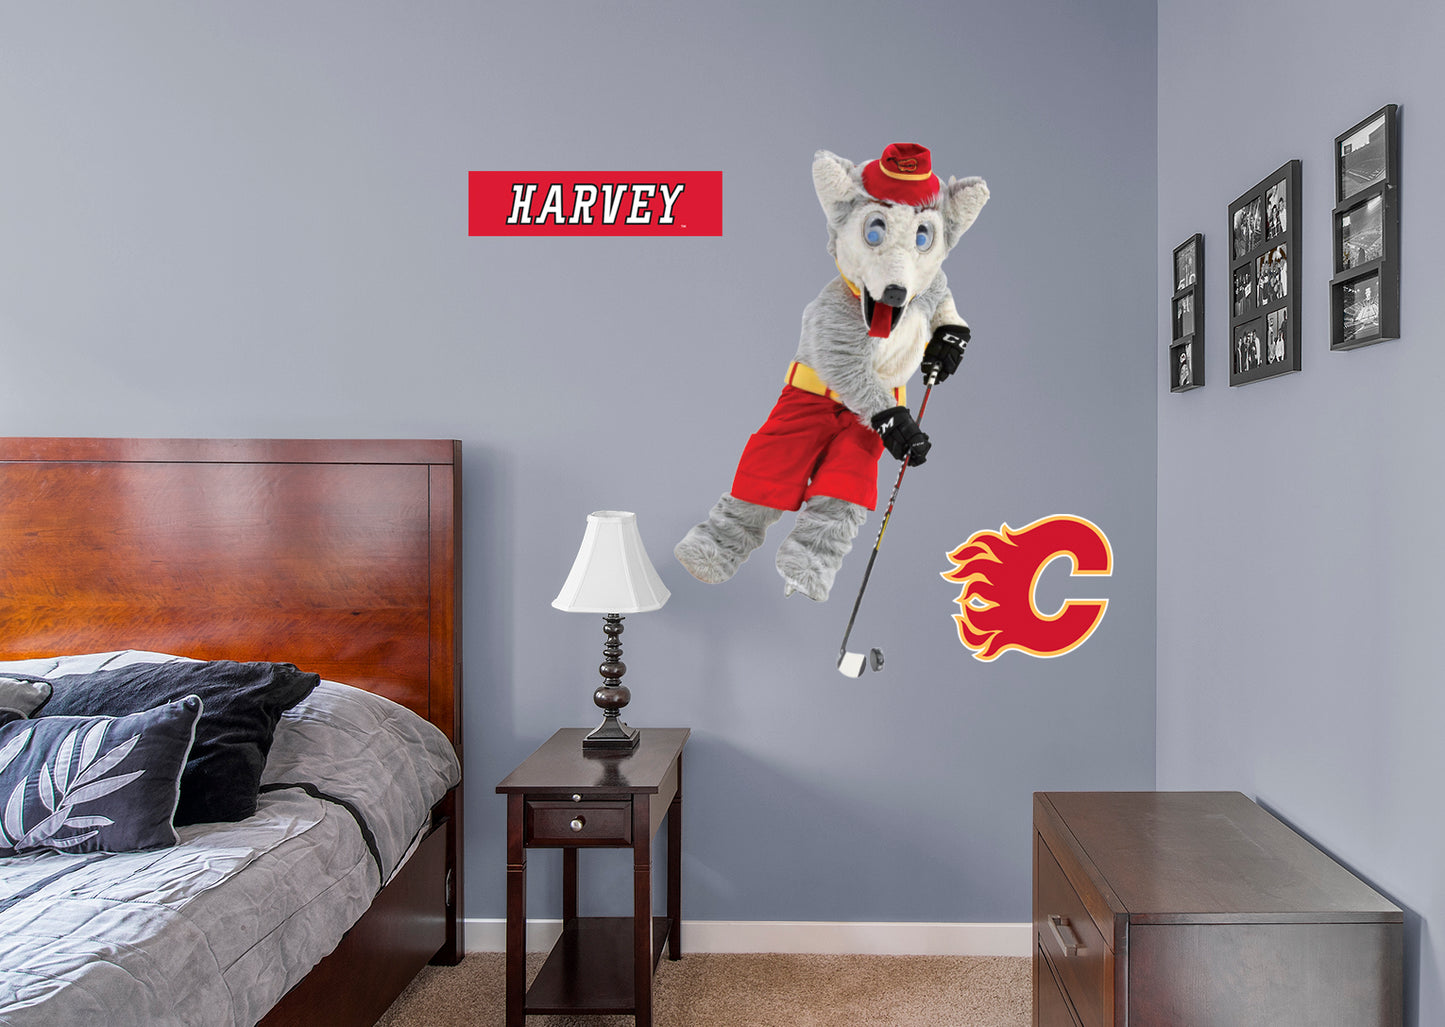 Calgary Flames: Harvey the Hound 2021 Mascot        - Officially Licensed NHL Removable Wall   Adhesive Decal